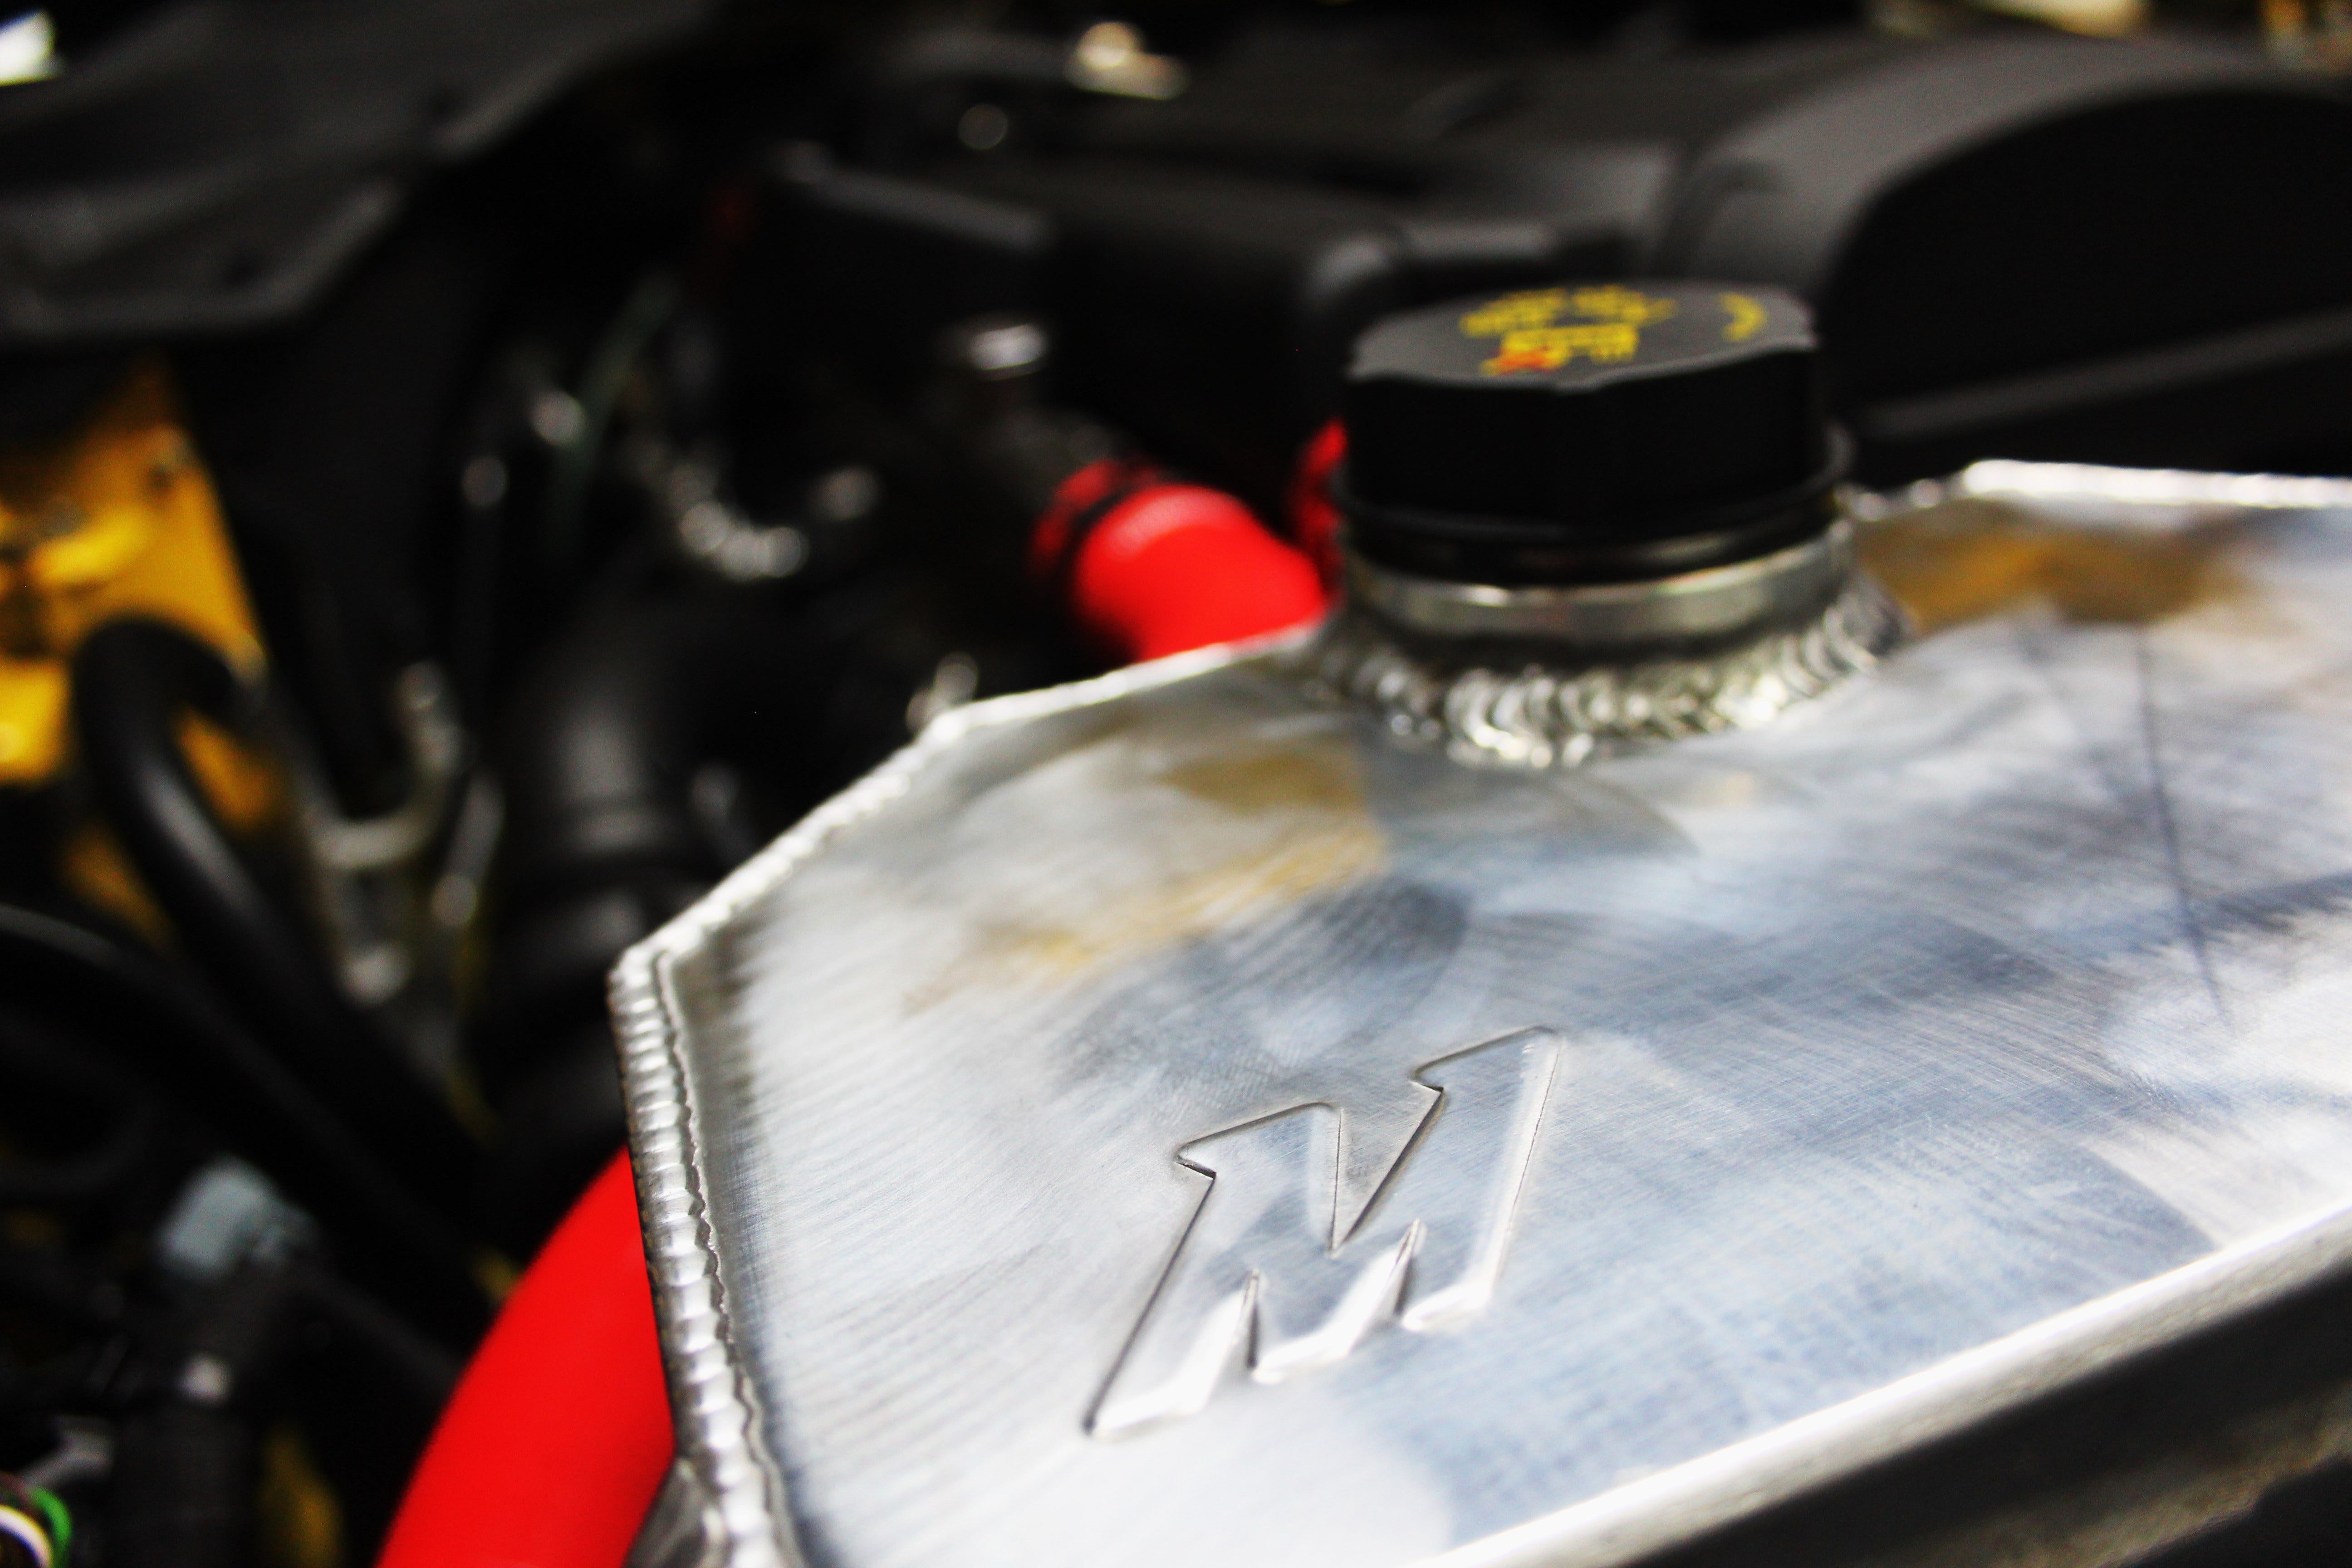 2015 Mustang Expansion Tank Project, Part 2: First Prototype Test Fit